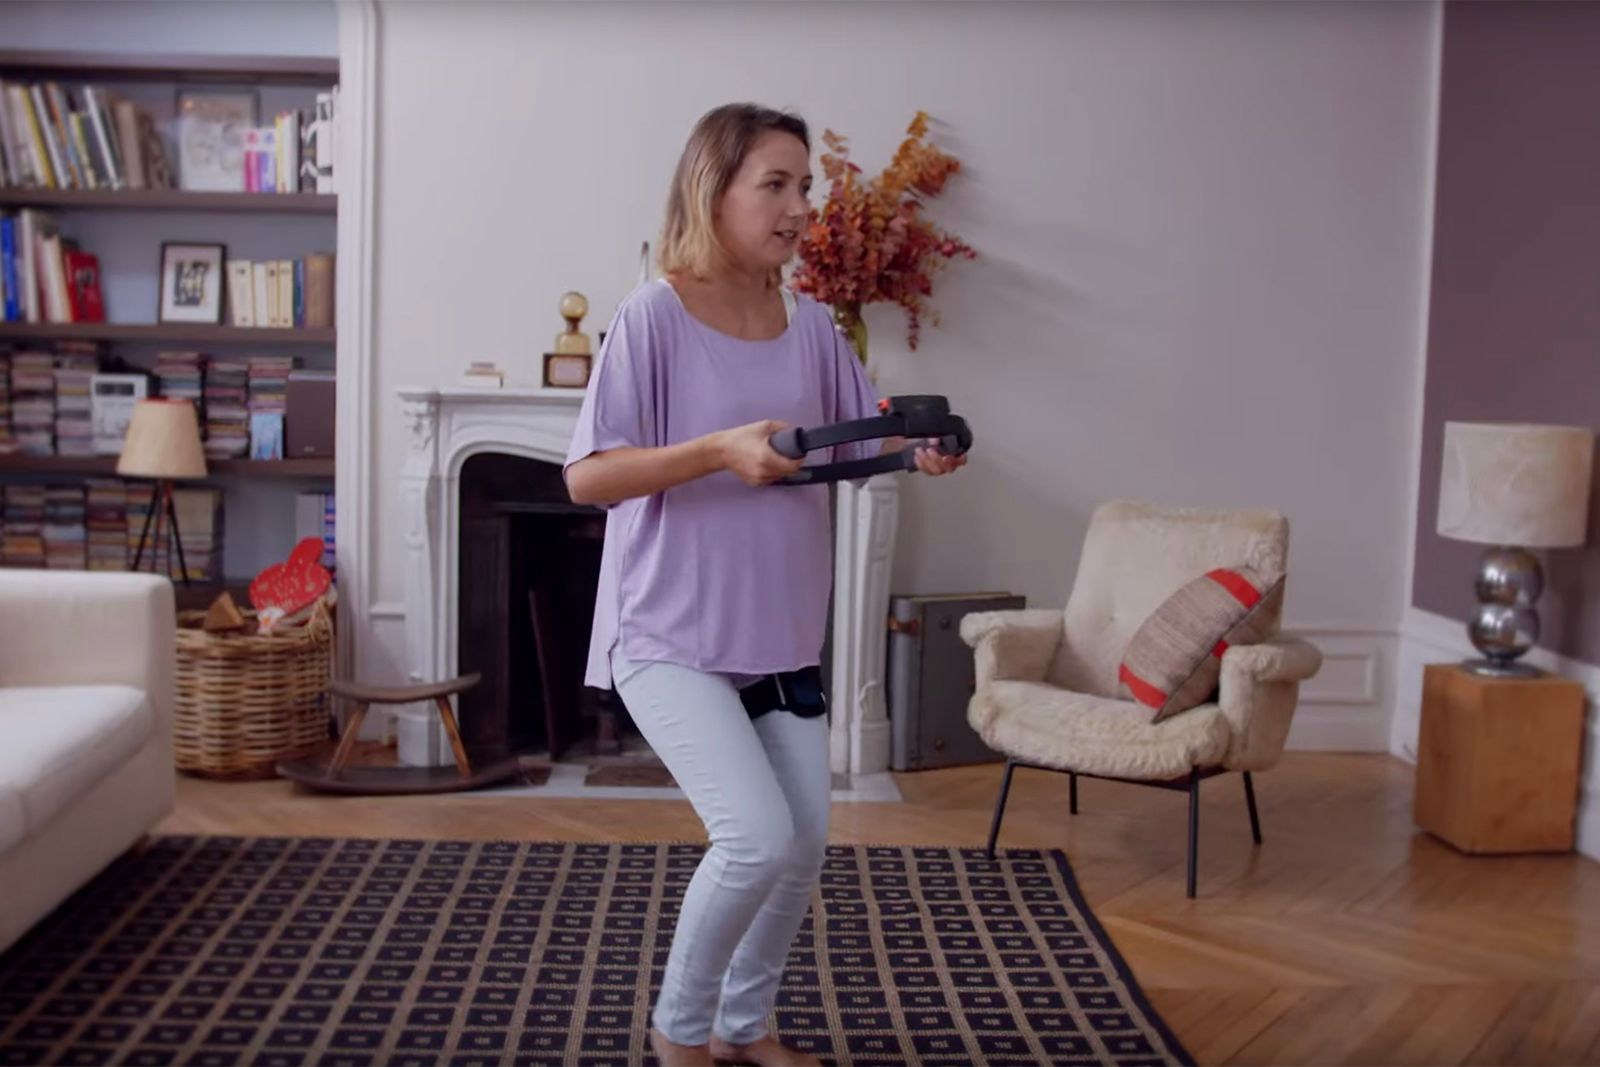 Nintendo teases new fitness accessory for Switch but what is it image 1